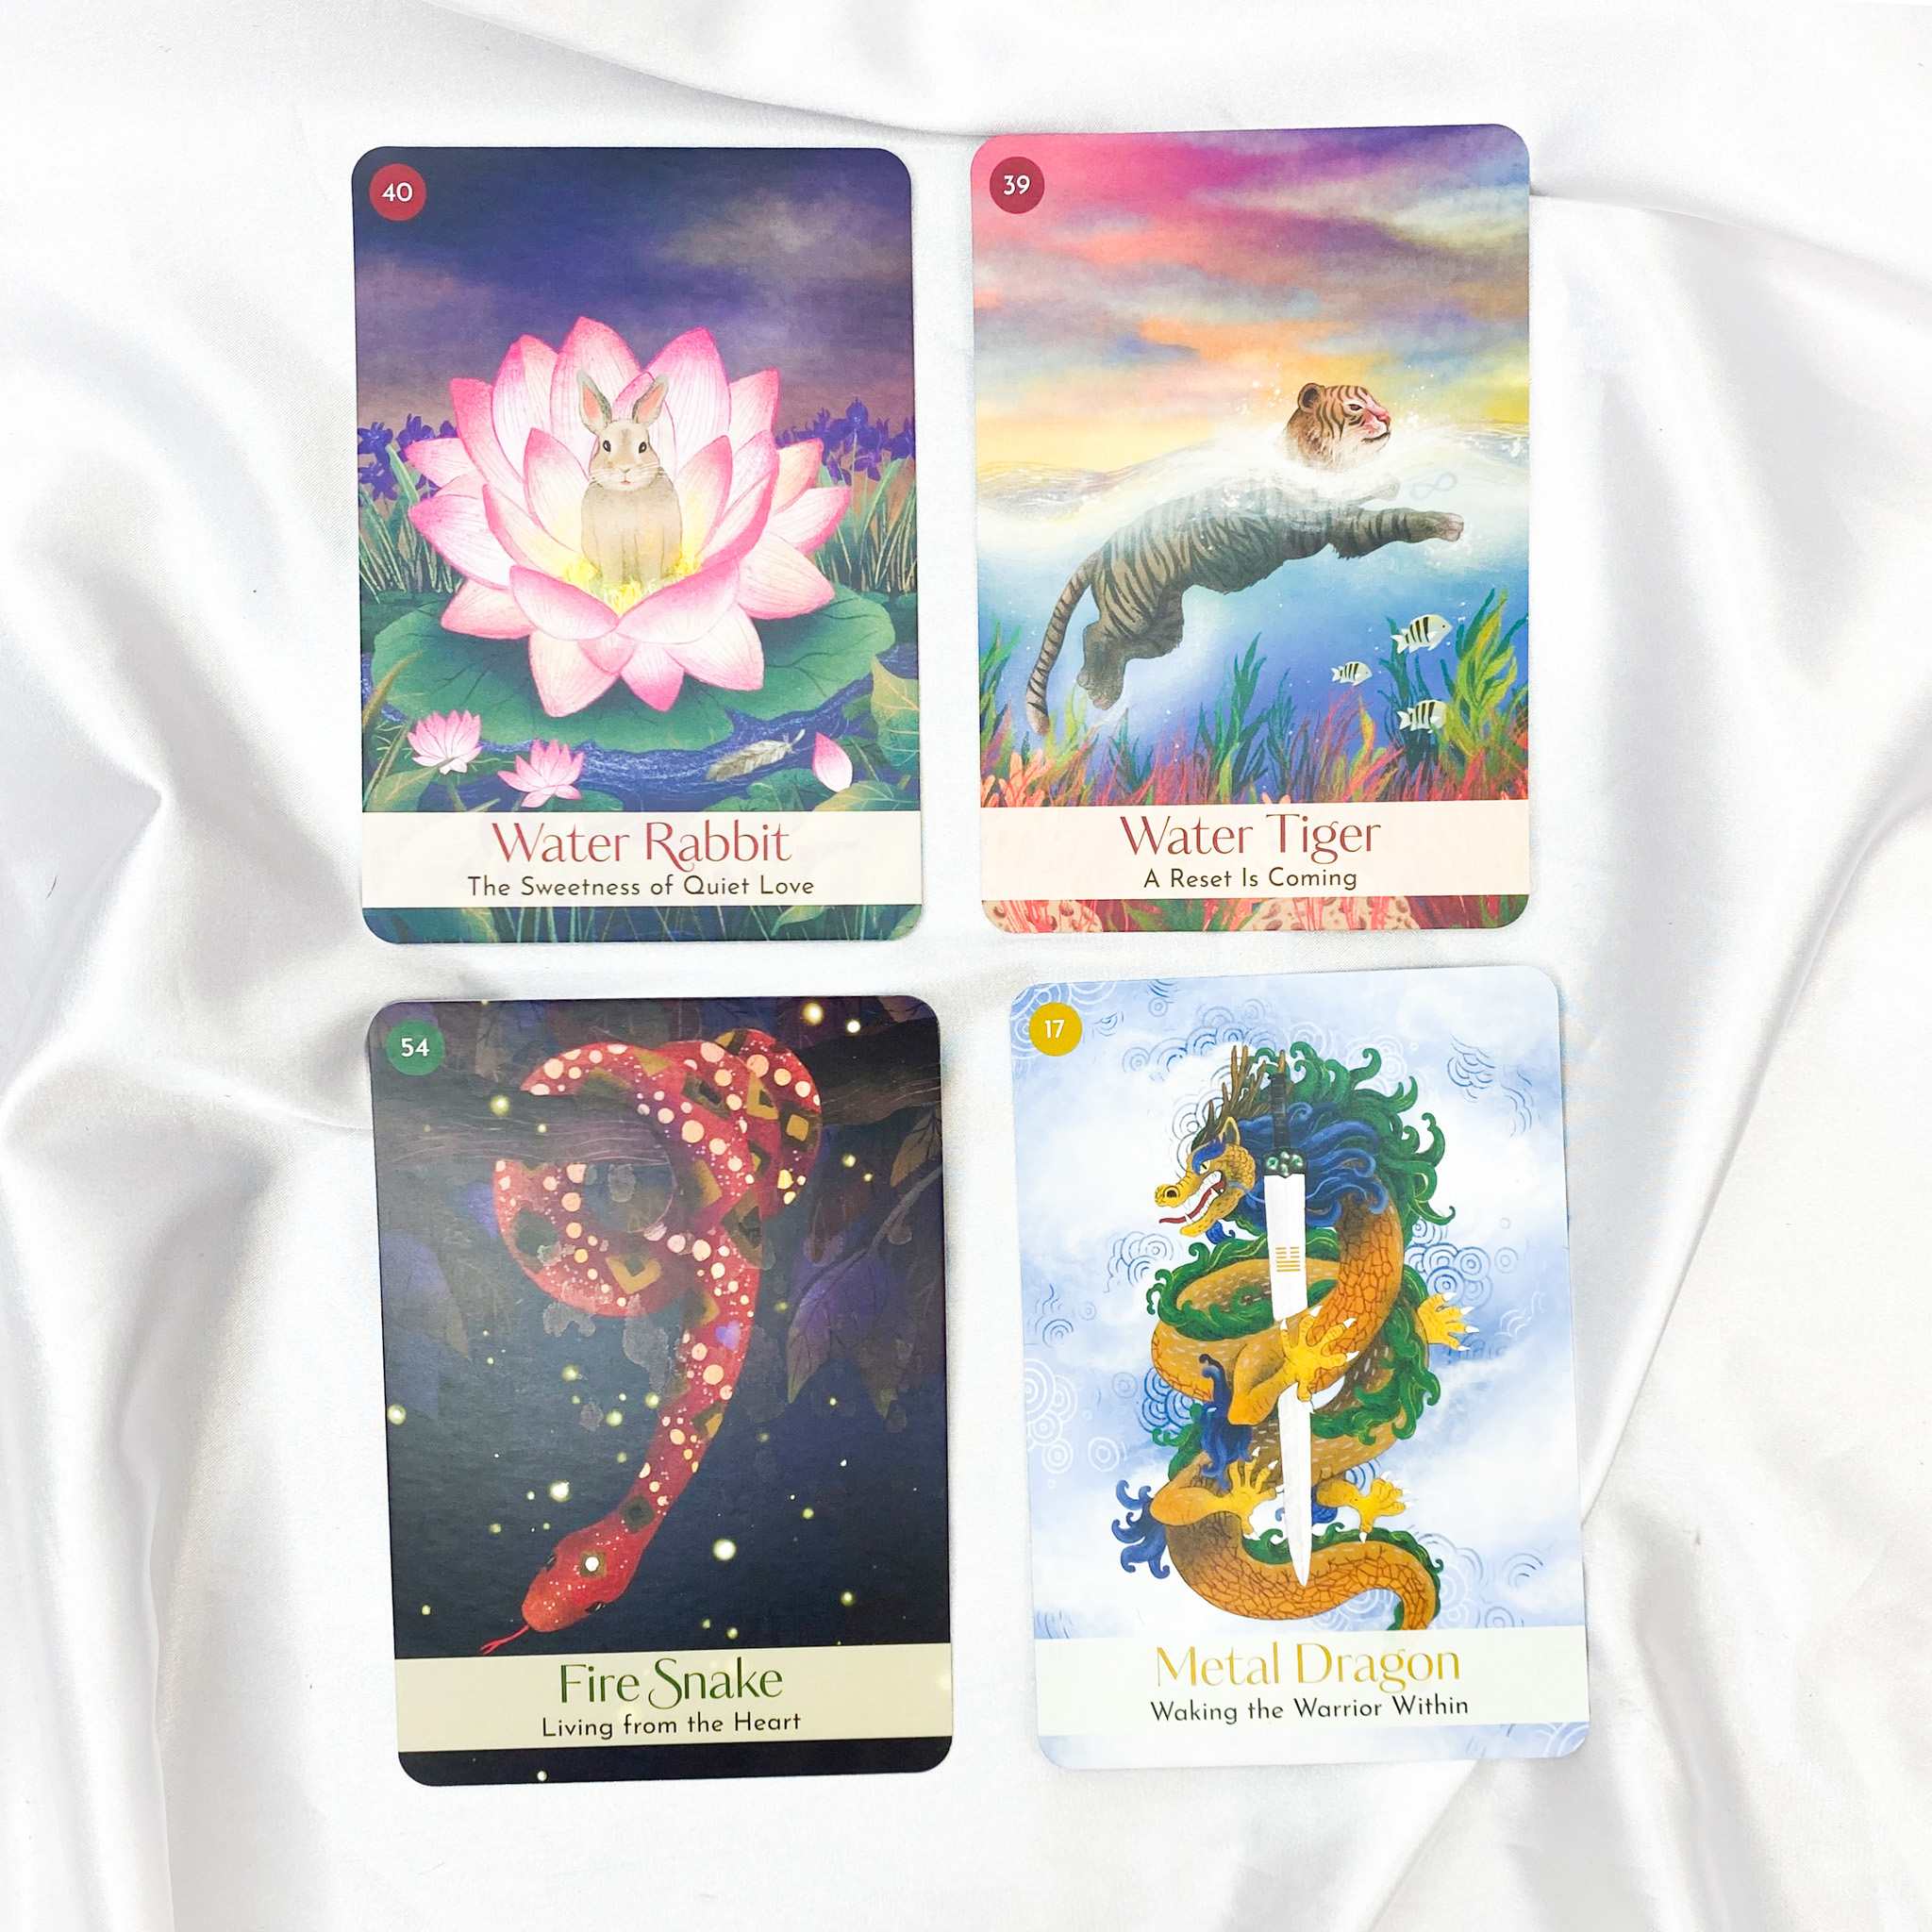 Chinese Five Element Oracle Cards